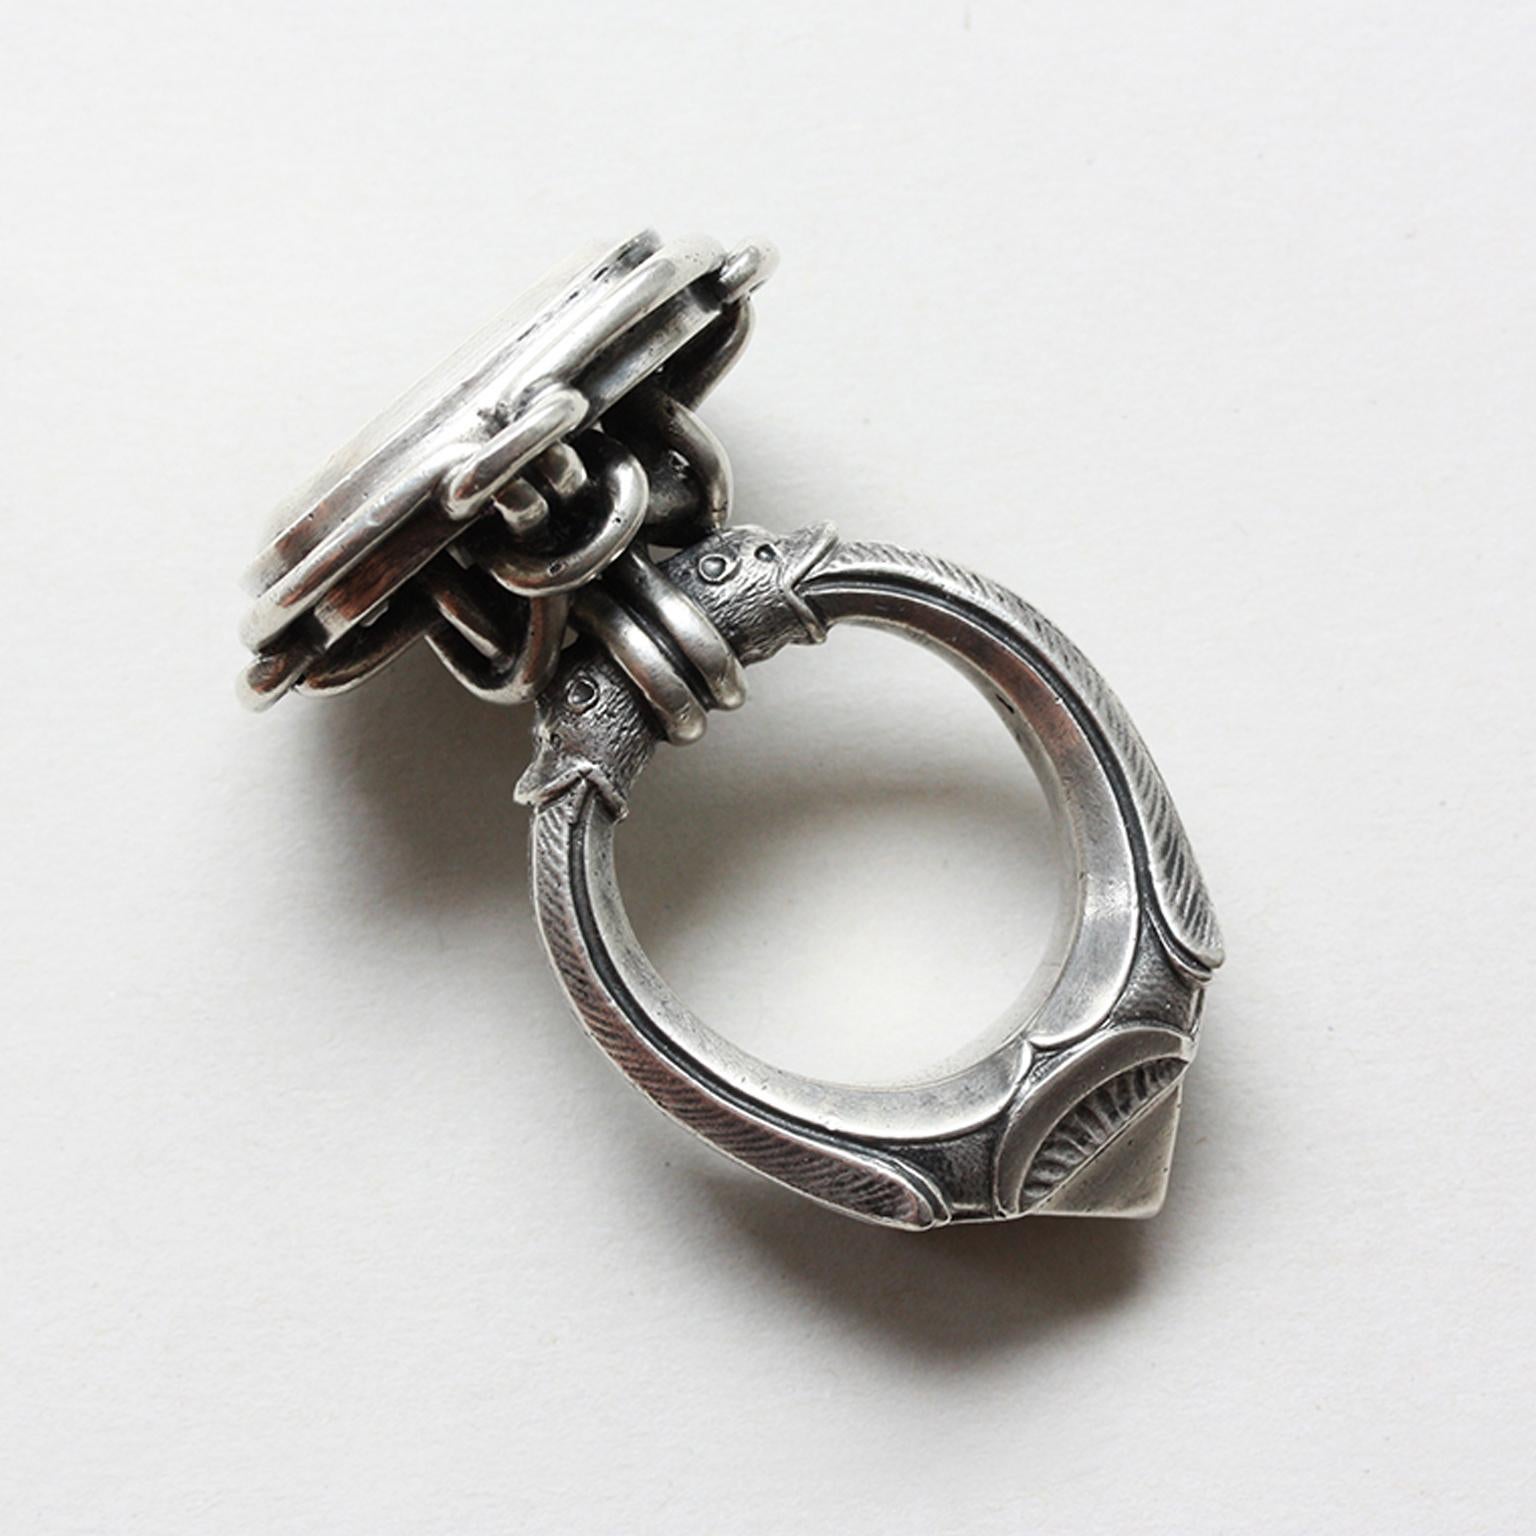 A large silver Neo Renaissance desk seal or presse papier in the form a Renaissance ring with an octahedron diamond set in a quatrefoil bezel. The shank is held by the mouths of two animals. With the initials JPL. France circa 1870.

Weight: 73.5